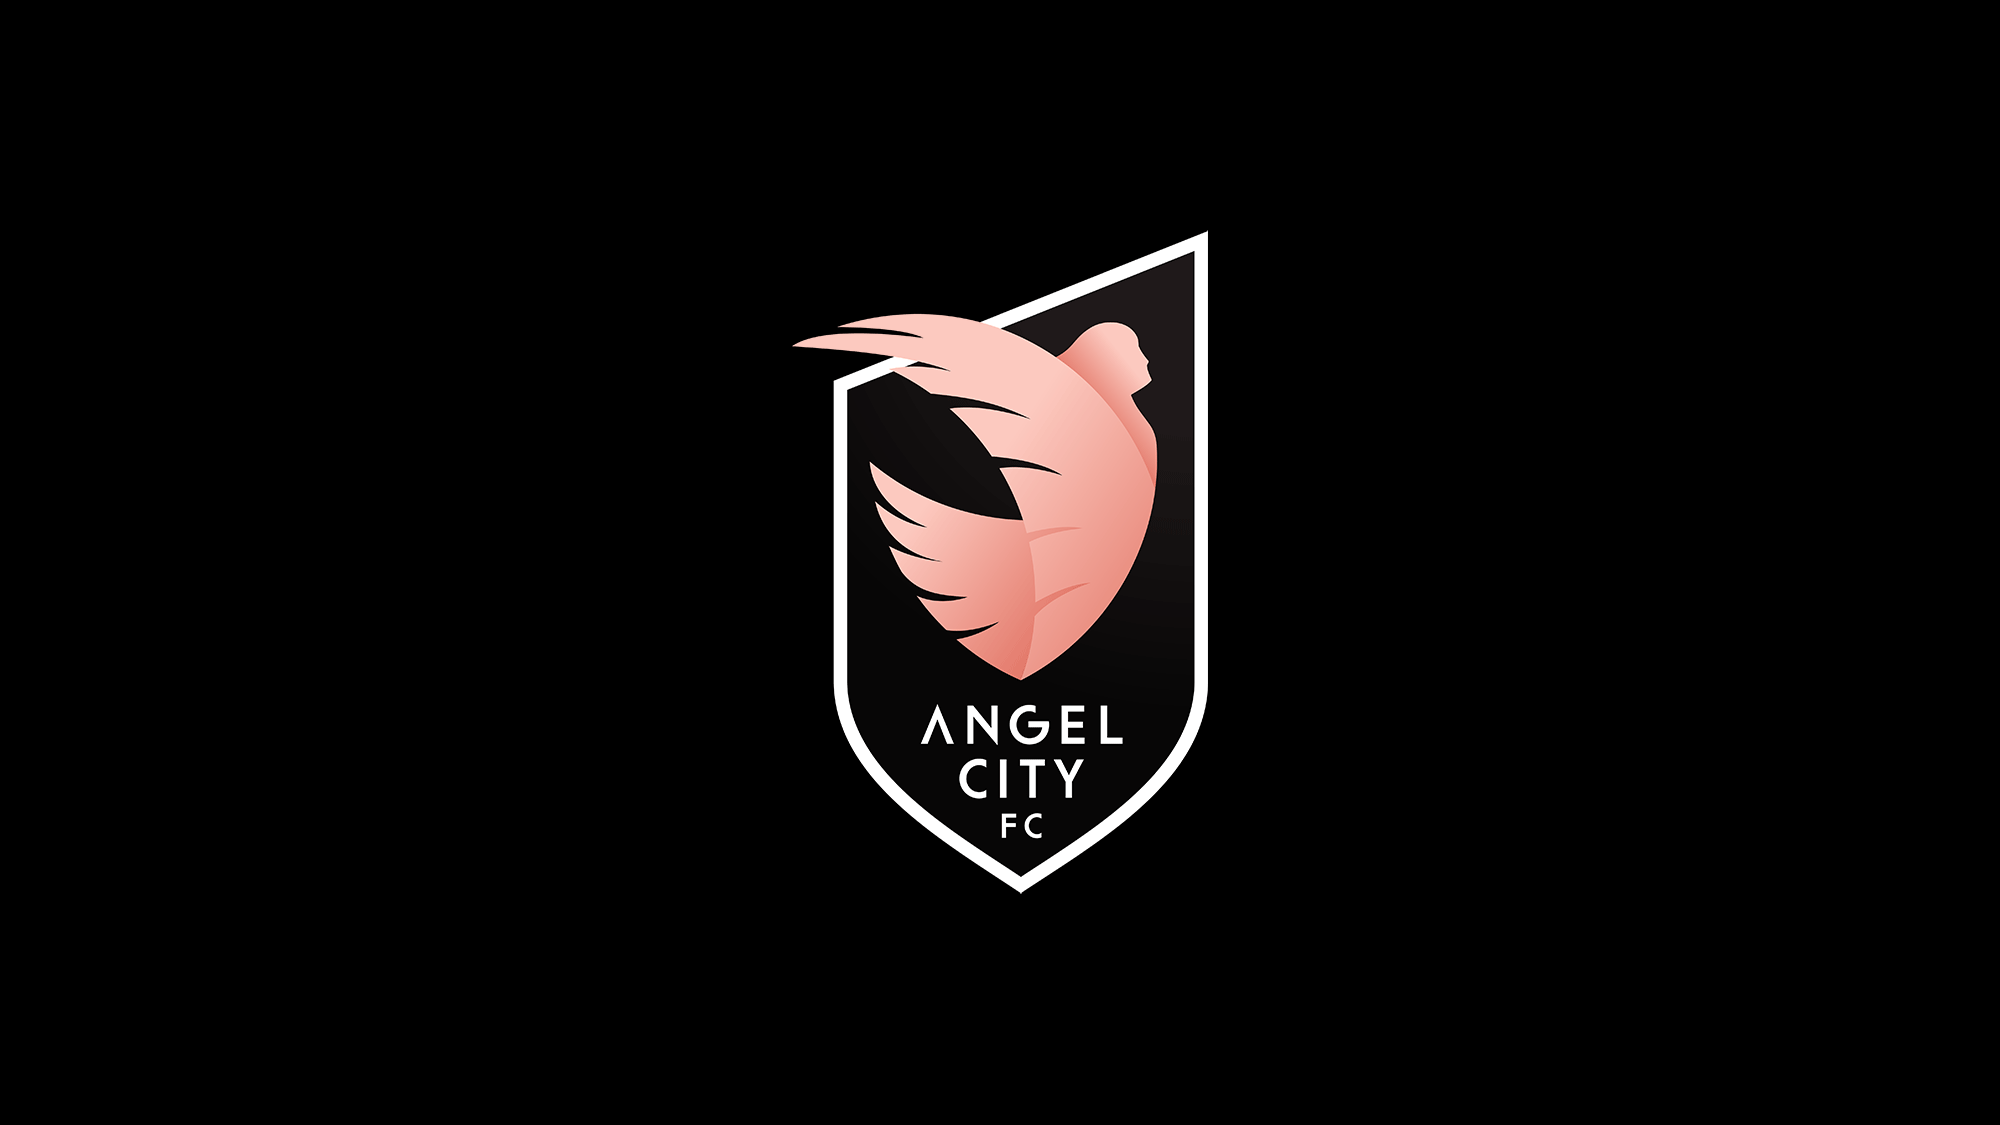 Brand New: New Logo for Angel City FC done In-house